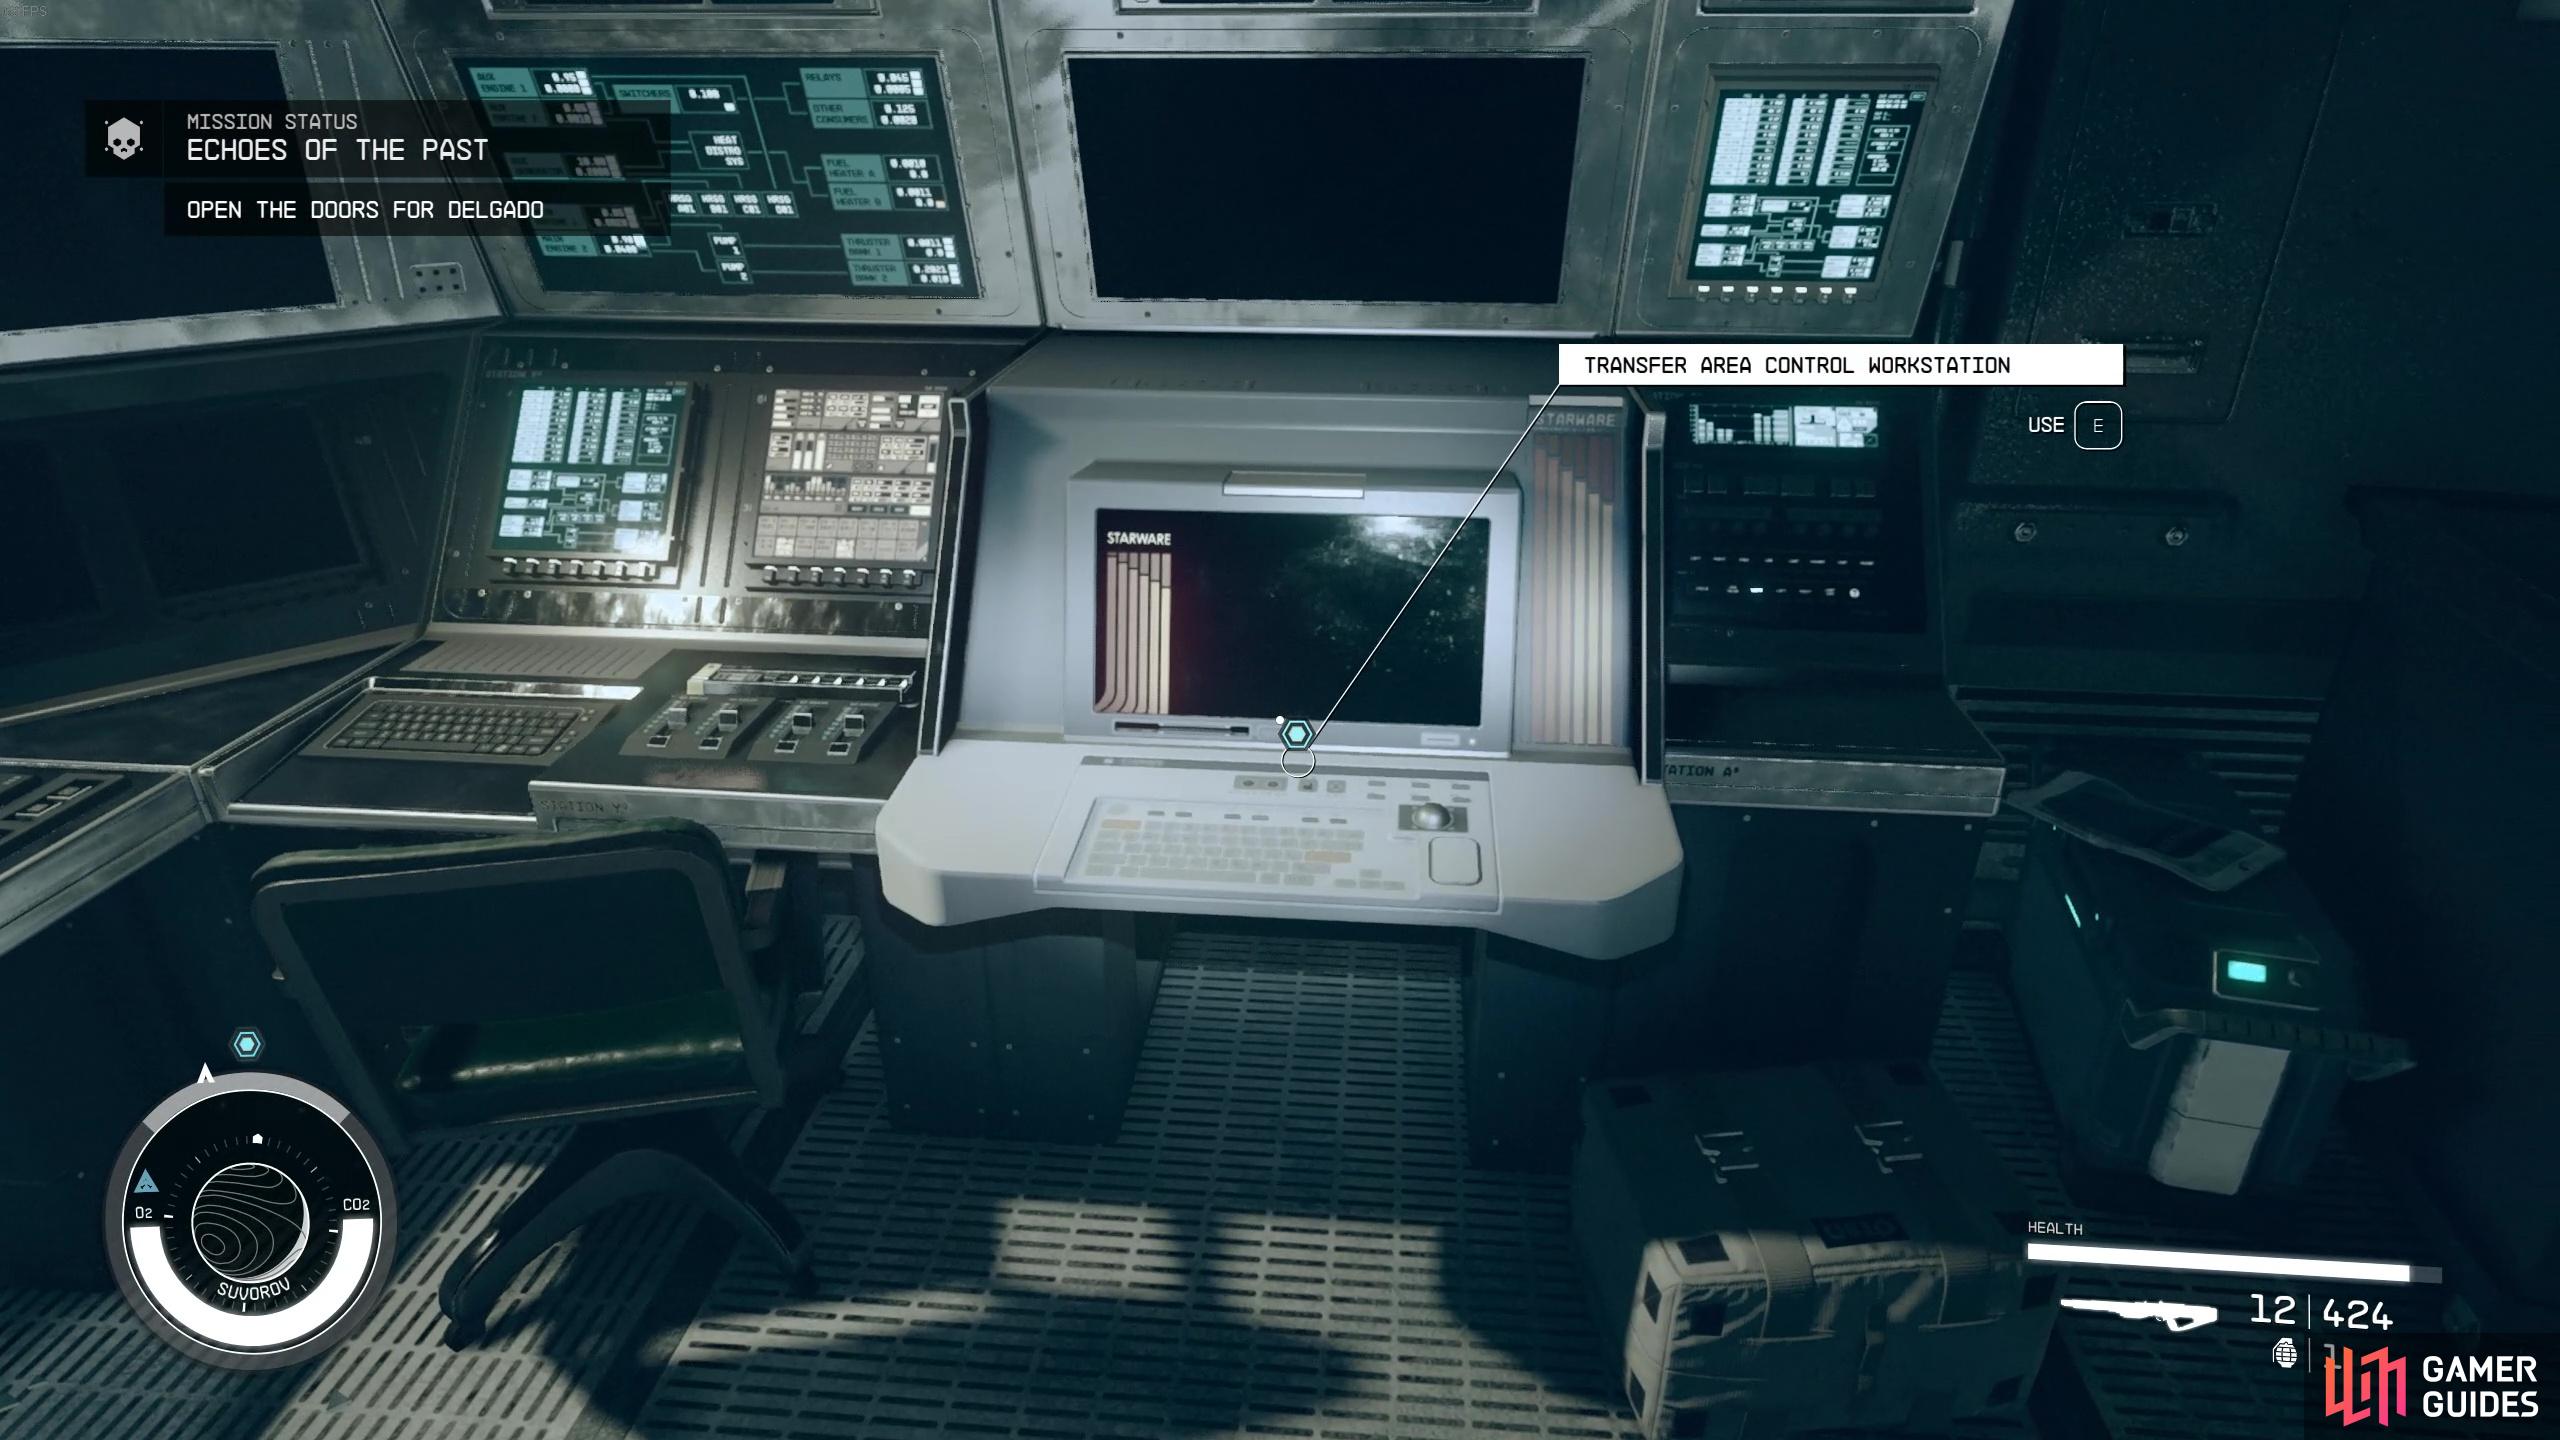 You'll need to use a variety of computers throughout the prison to find out information relating to Kryx's whereabouts.